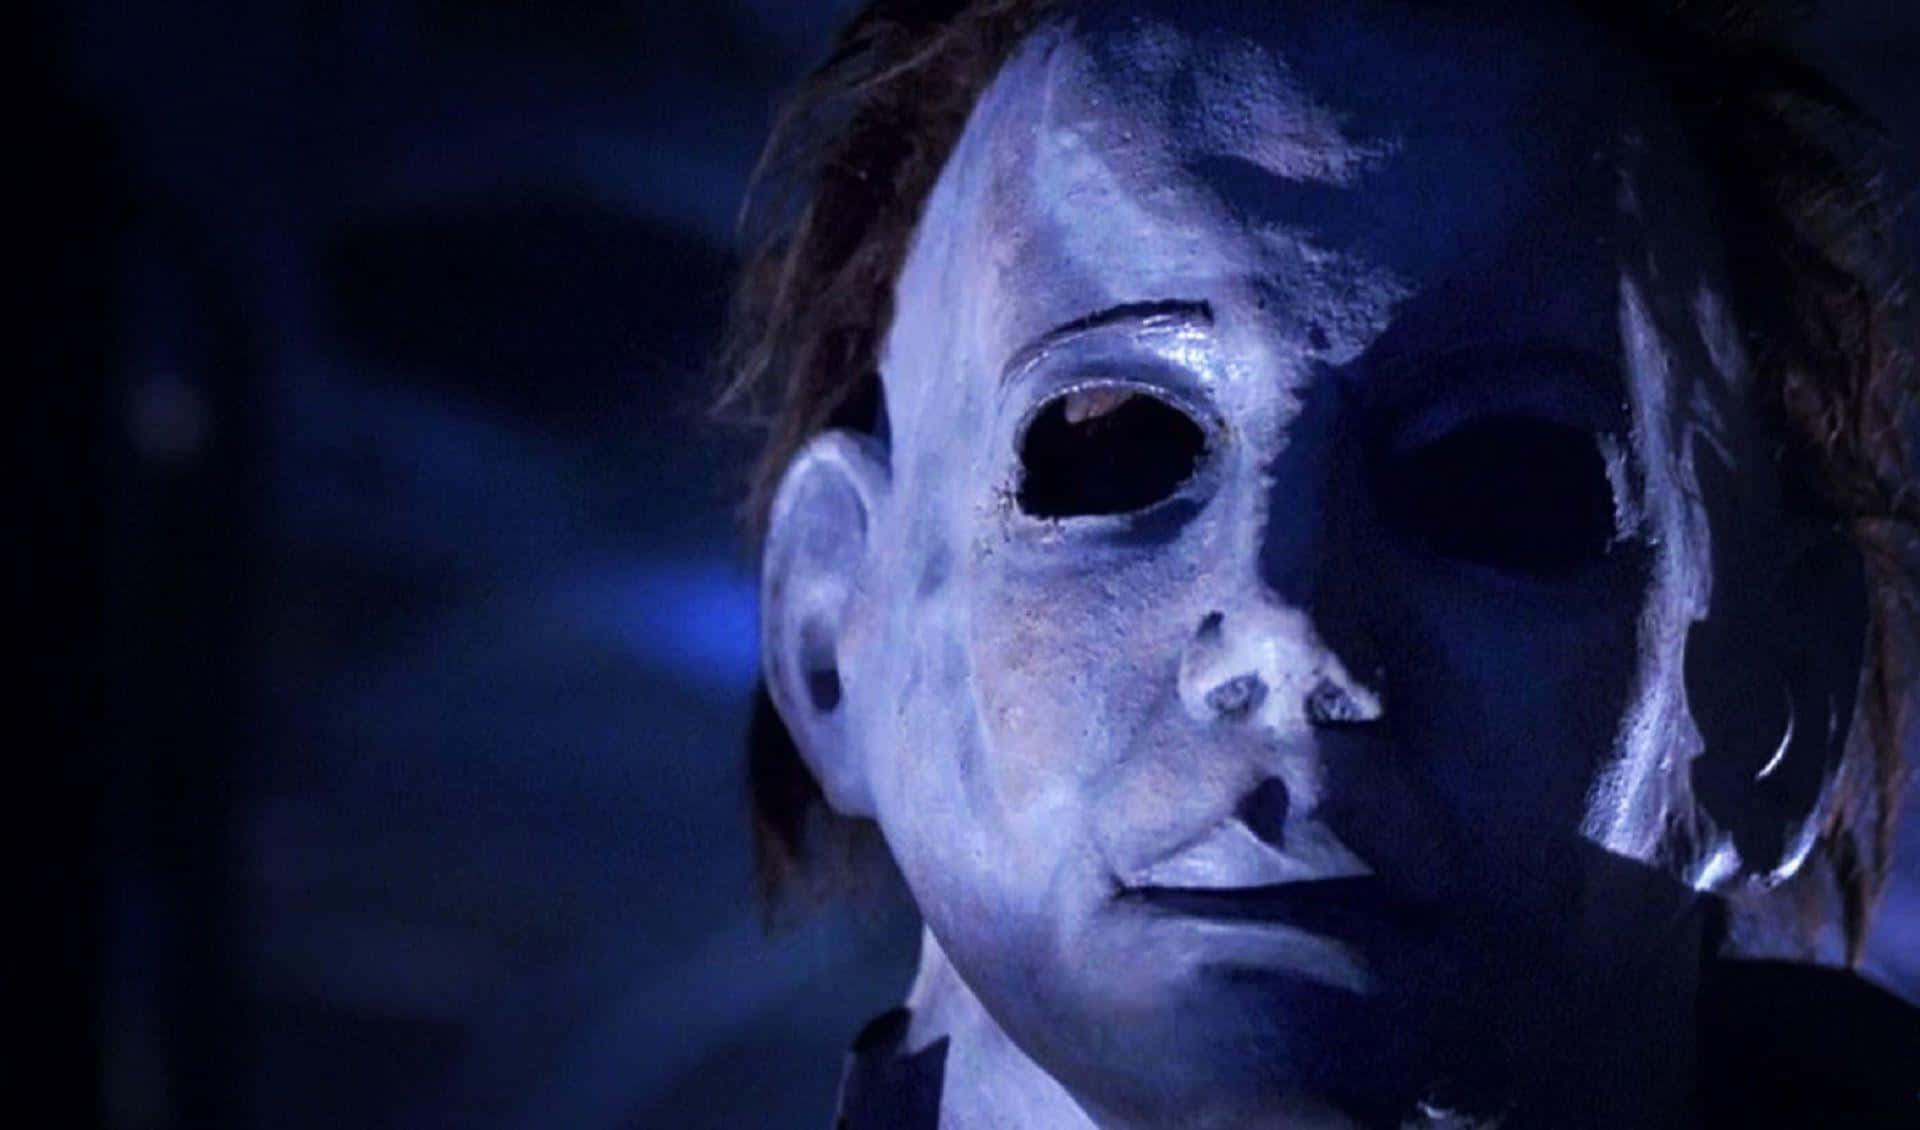 Michael Myers loomed large over Halloween